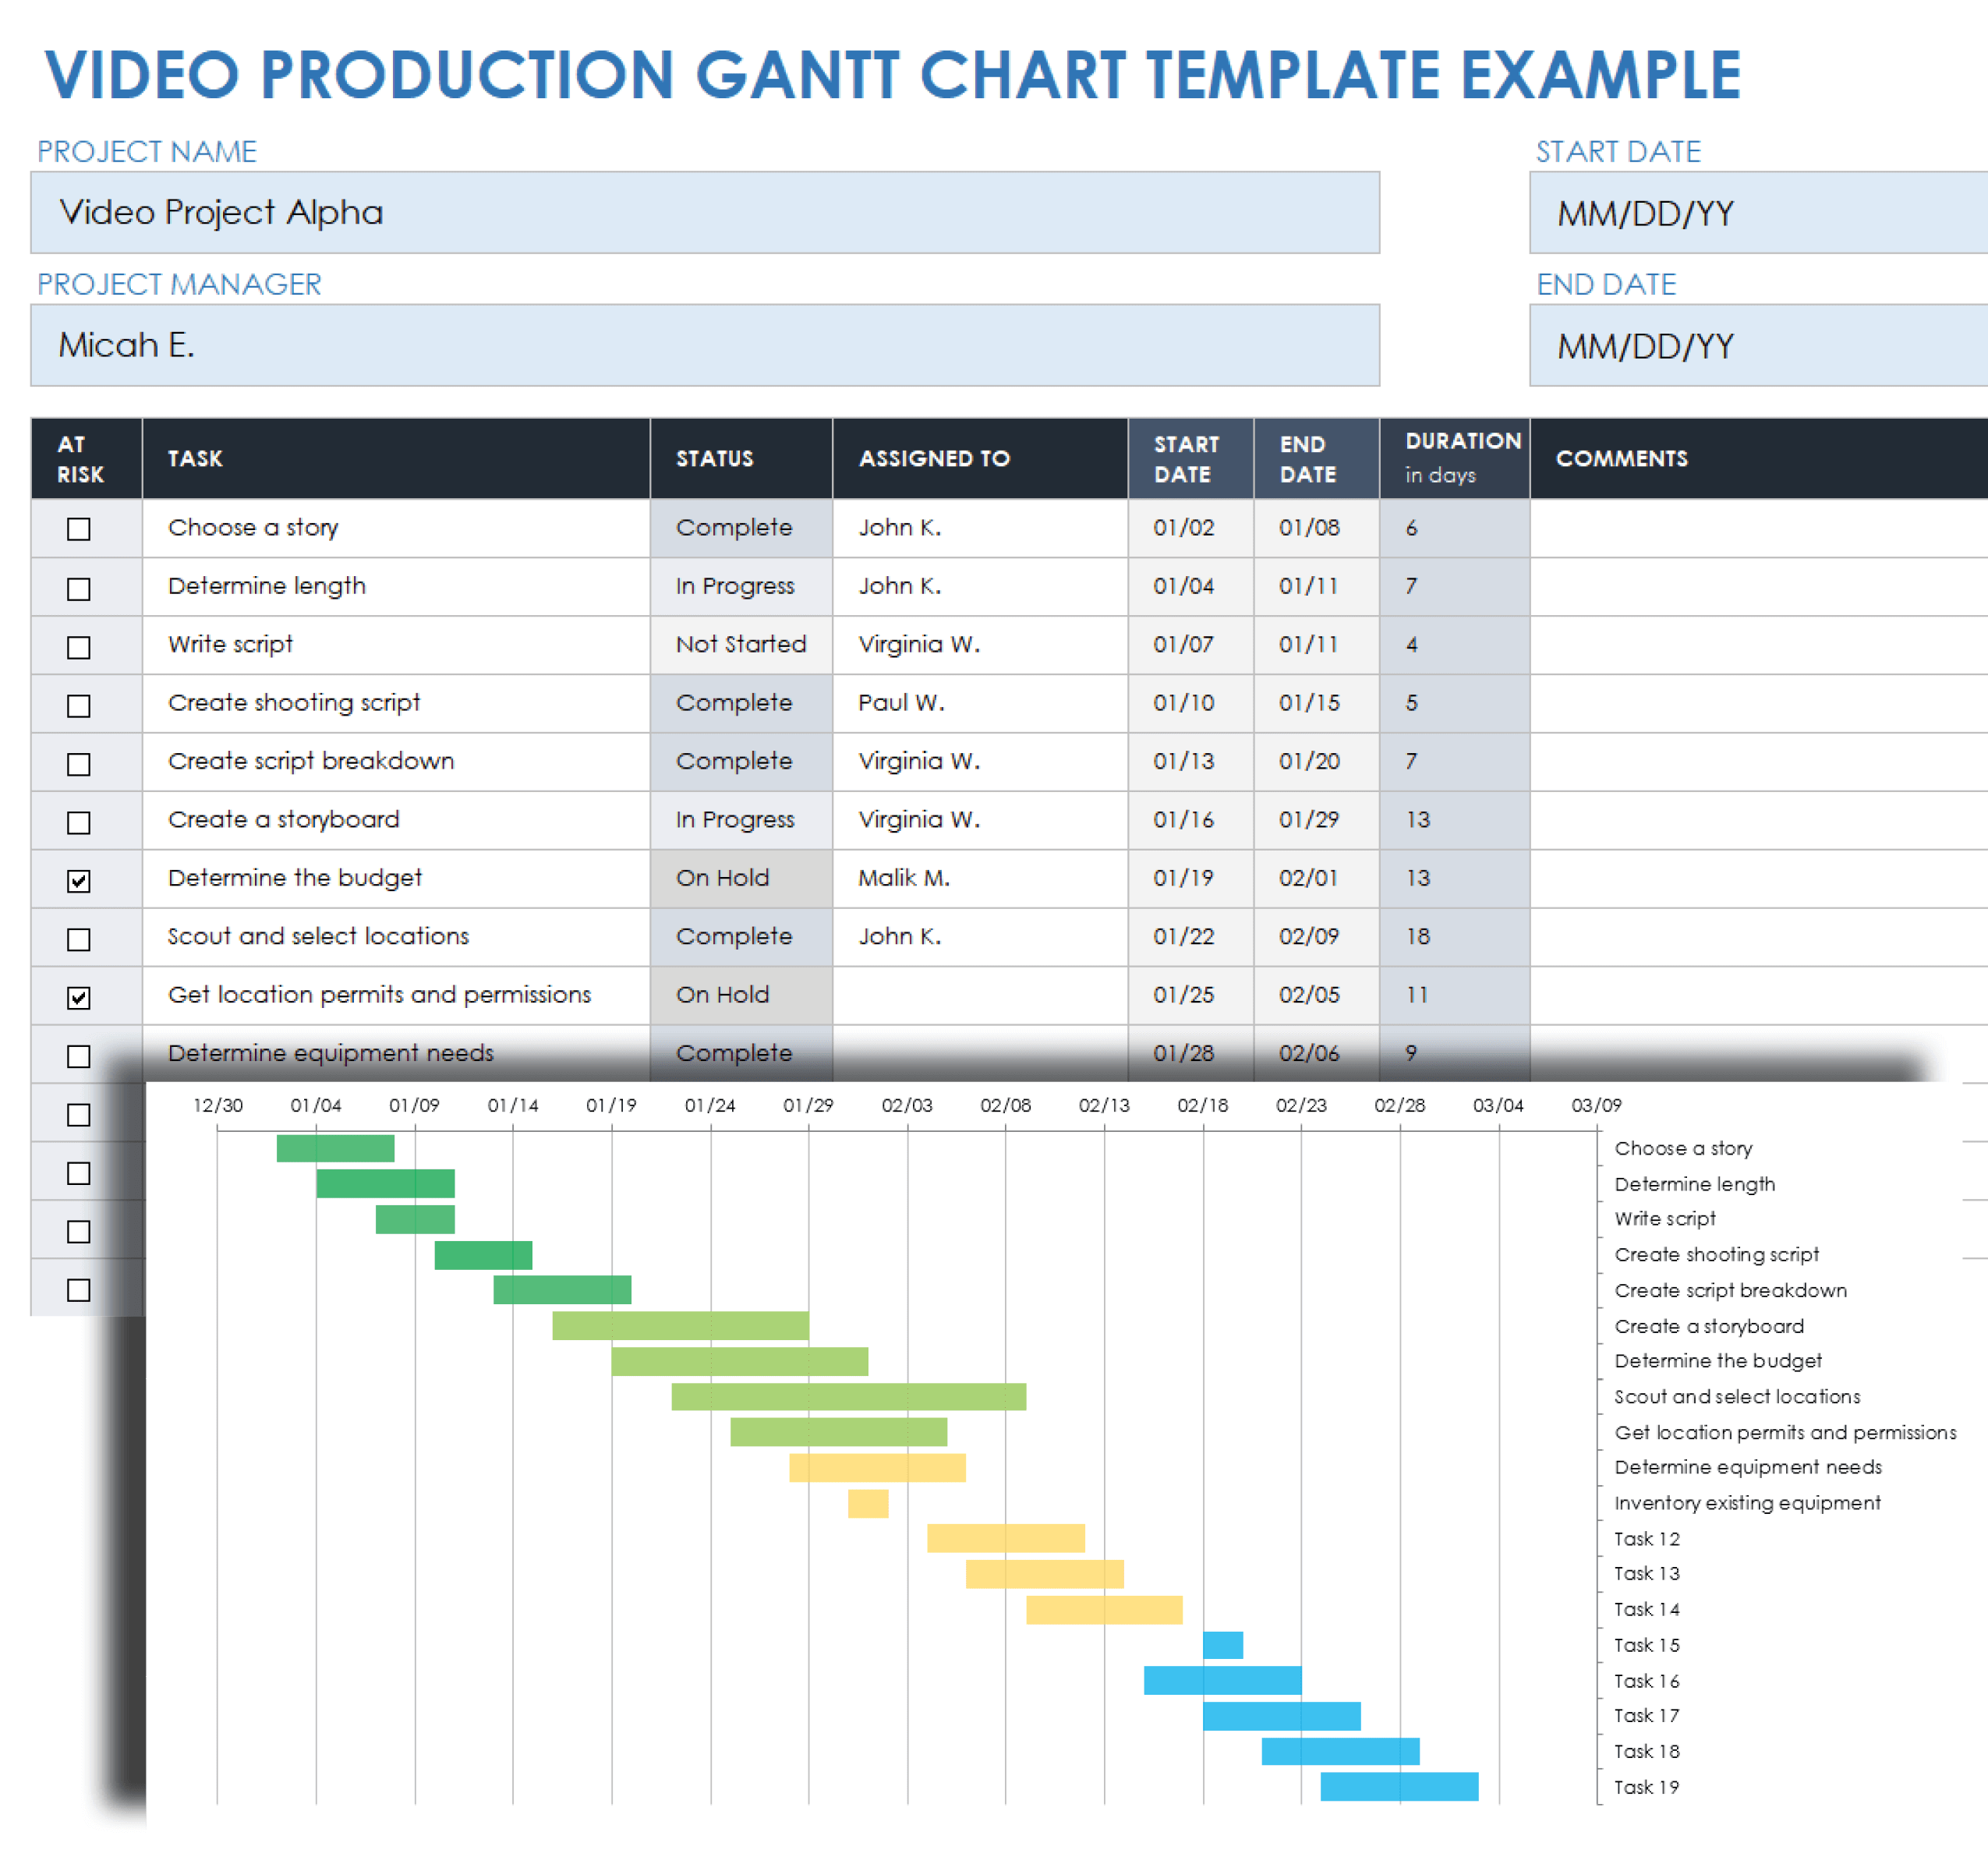 Video Production Gantt Chart Template Example